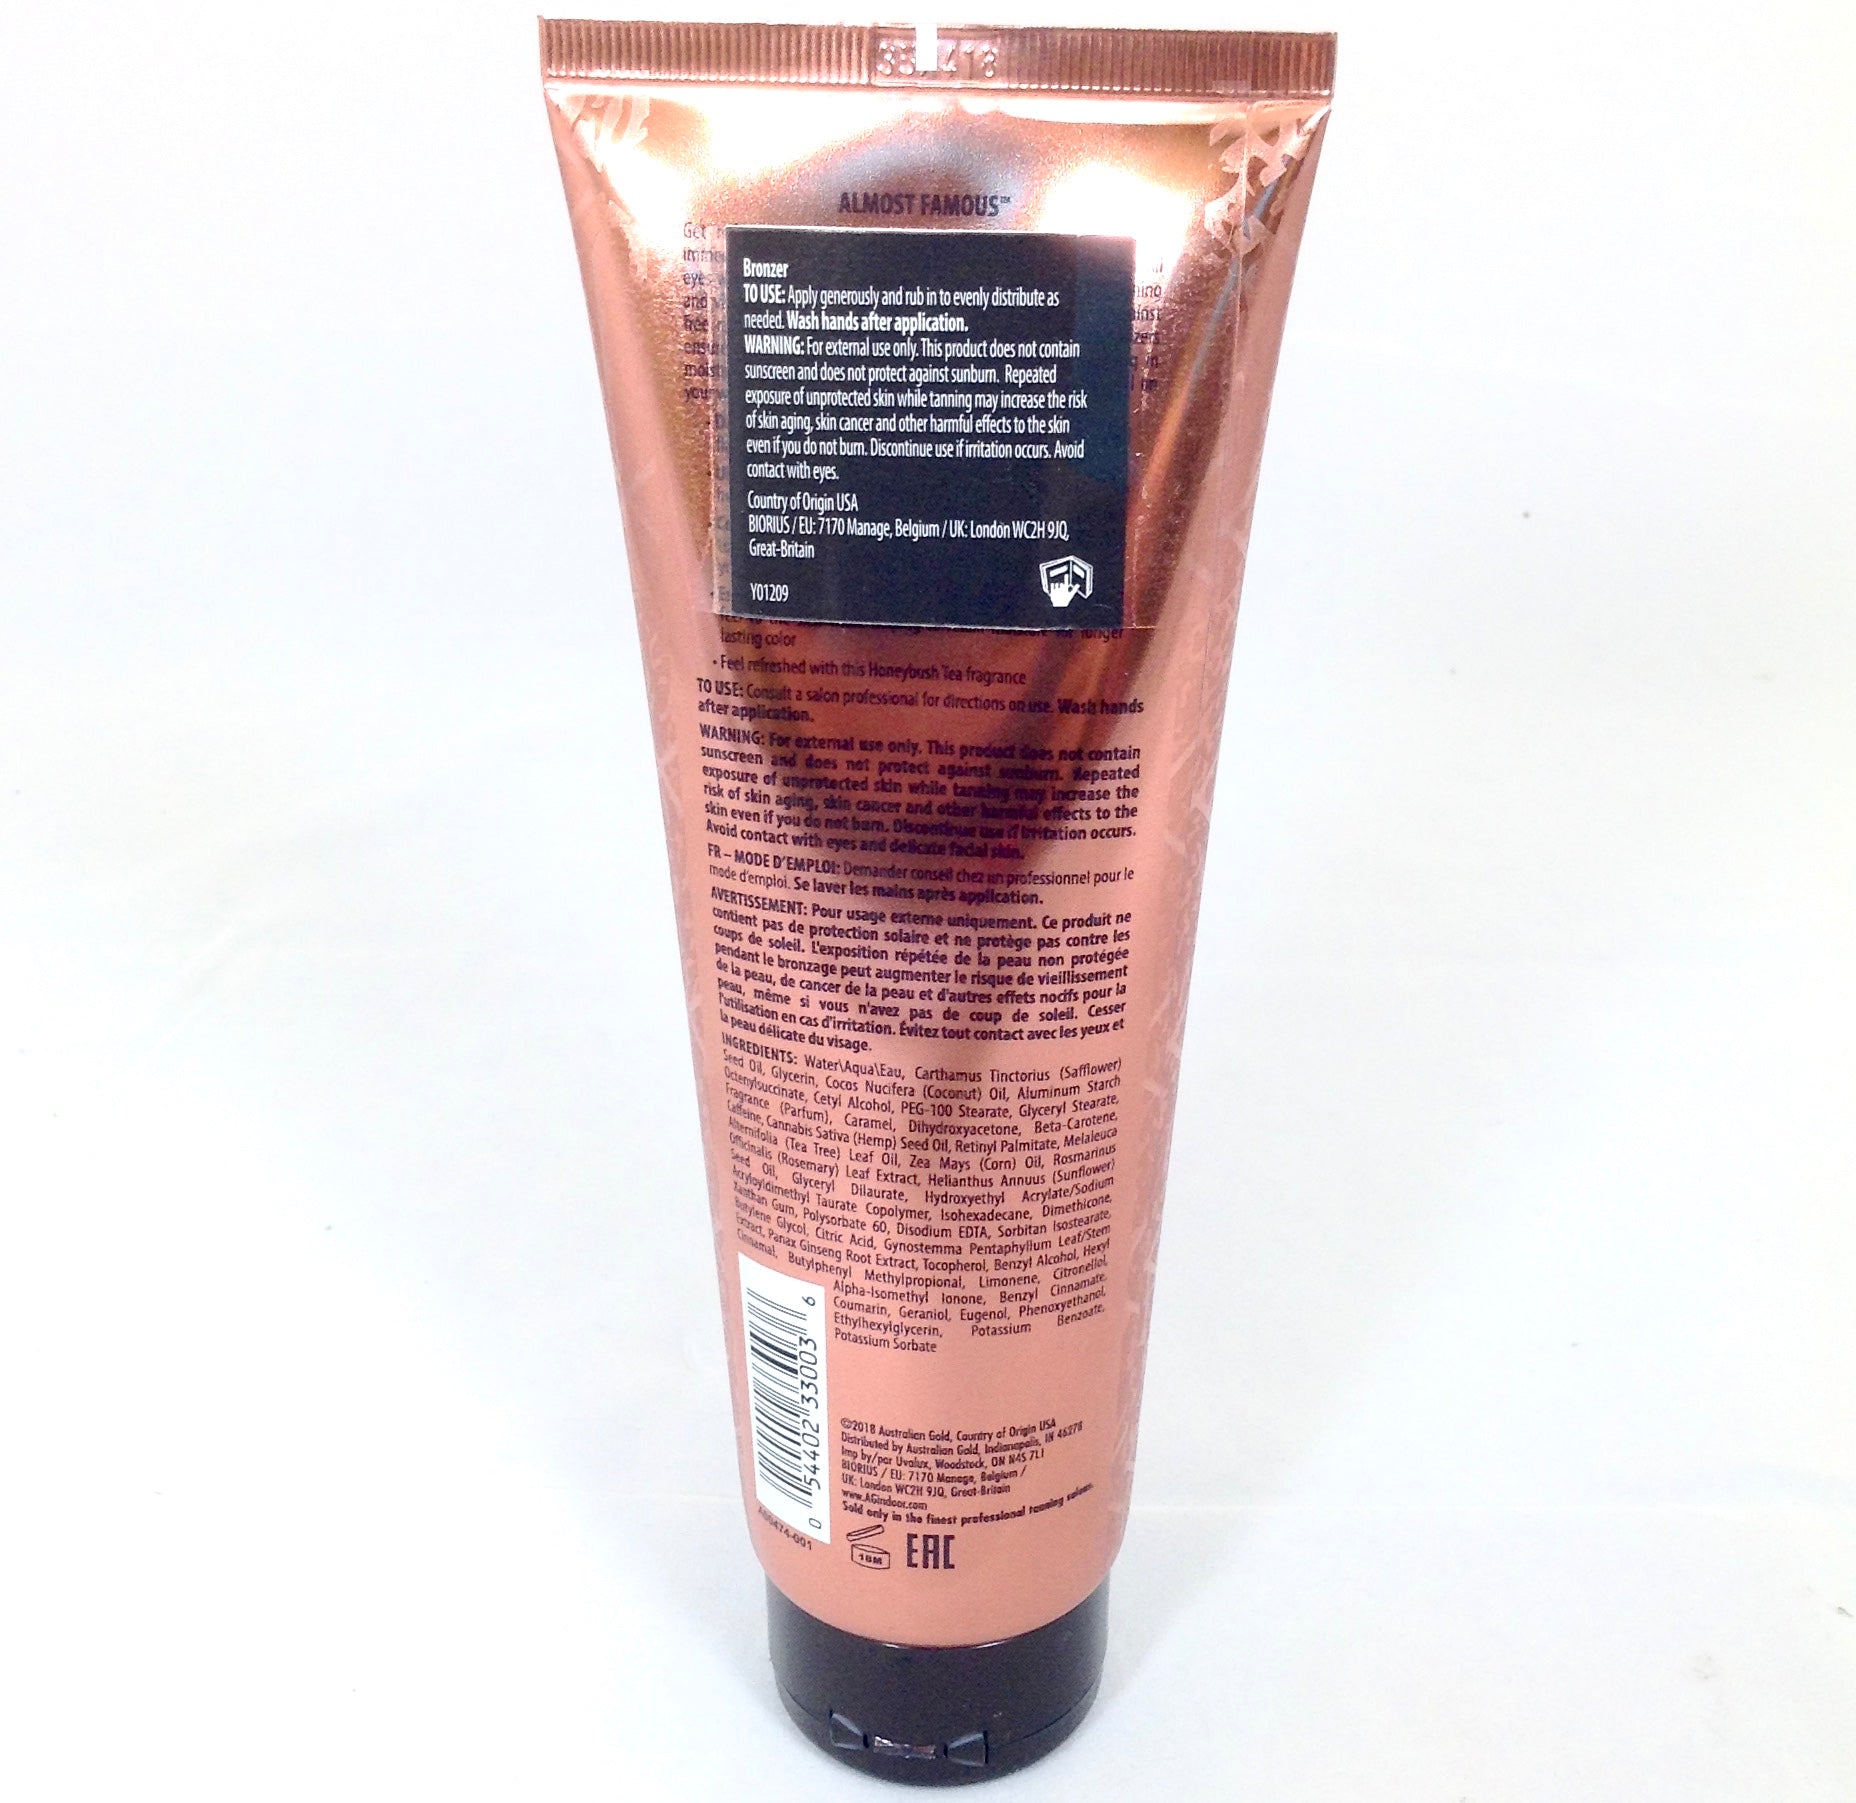 Australian Gold Almost Famous tanning lotion DHA bronzer